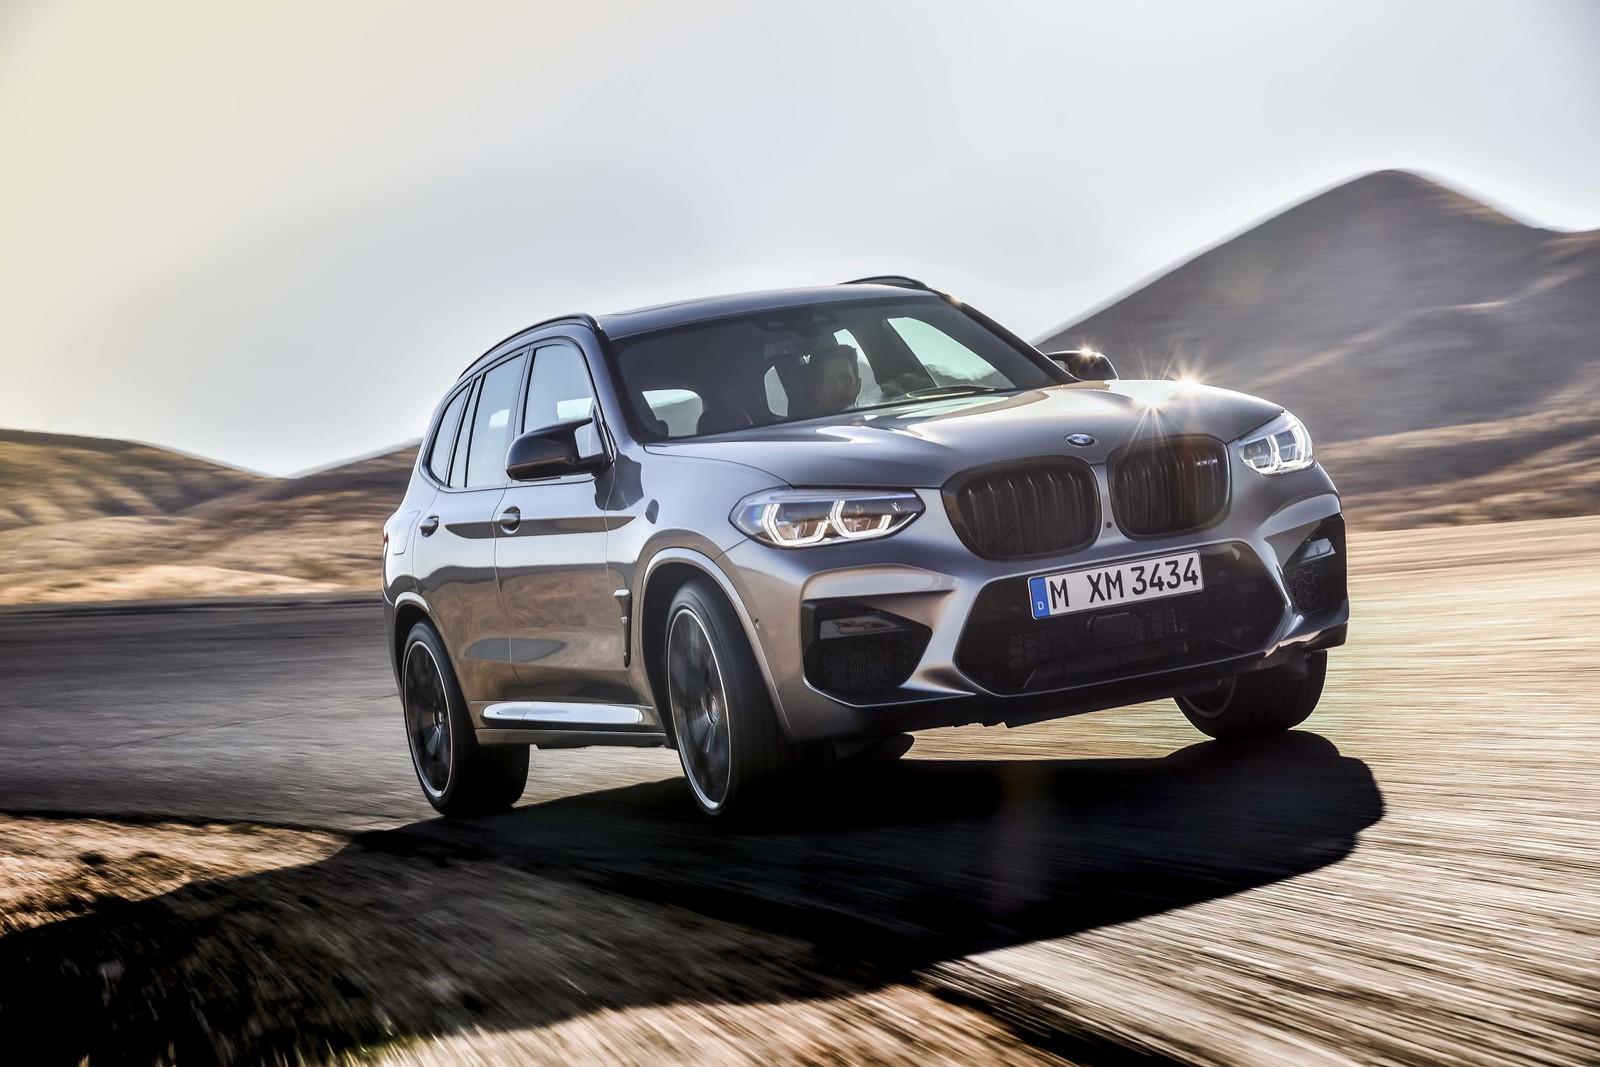 BMW X3 M Picture, Photo, Wallpaper And Videos. Top